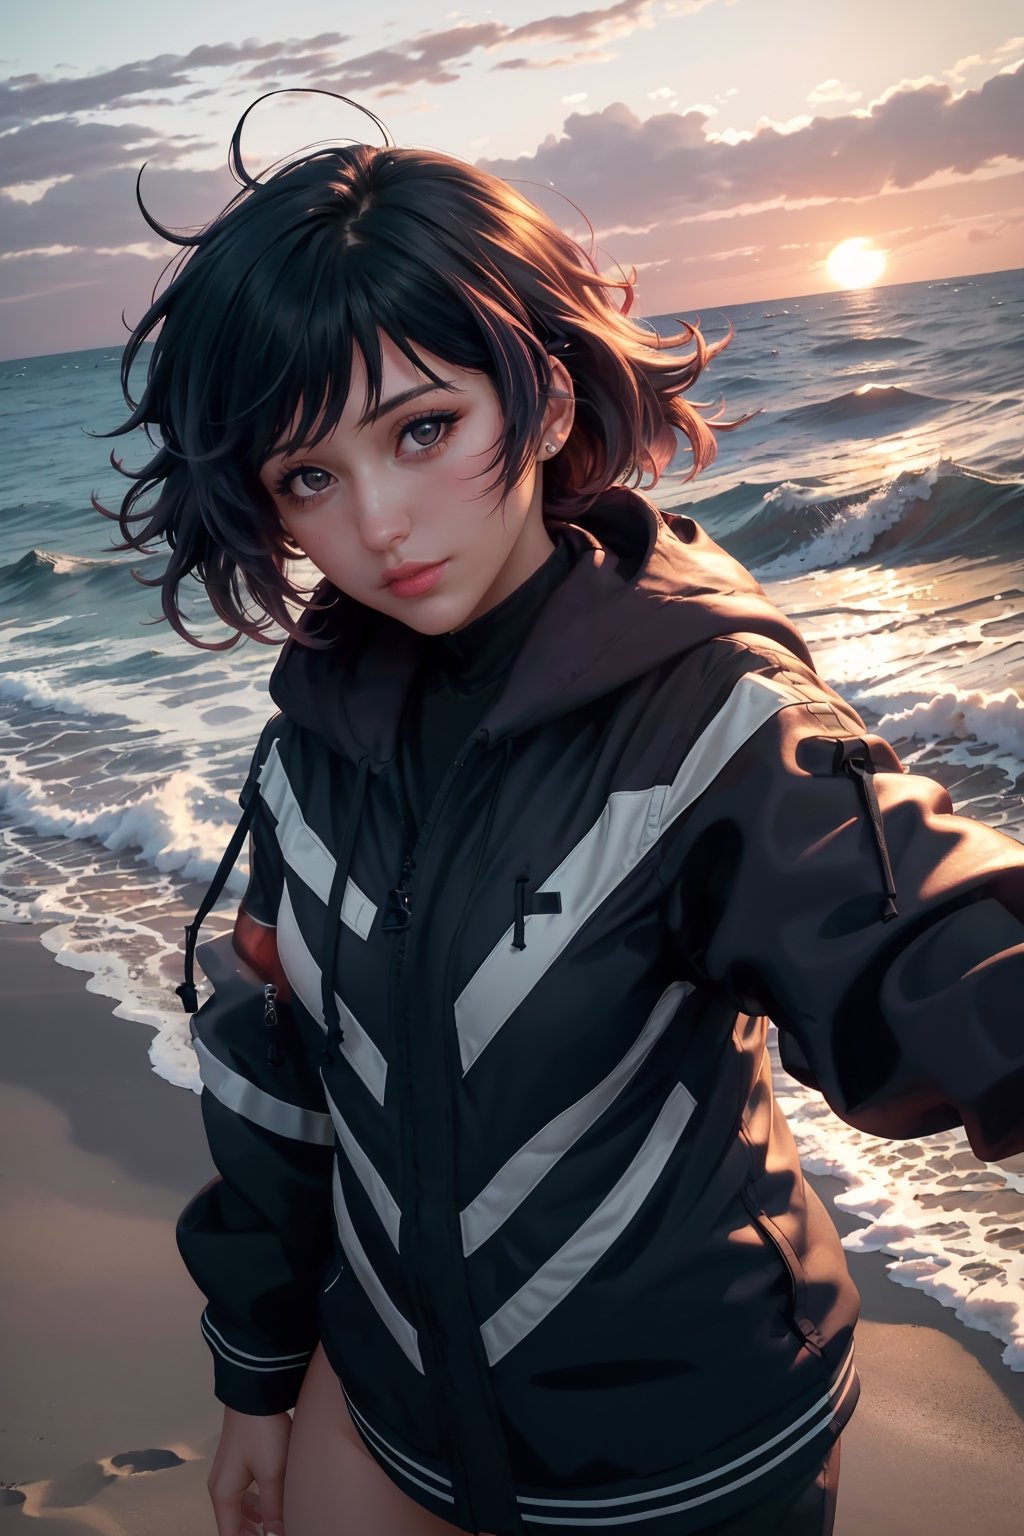 xxmix_girl,a woman takes a fisheye selfie on a beach at sunset, the wind blowing through her messy hair. The sea stretches out behind her, creating a stunning aesthetic and atmosphere with a rating of 1.2.,xxmix girl woman, futanari, close up,reina,Extremely Realistic